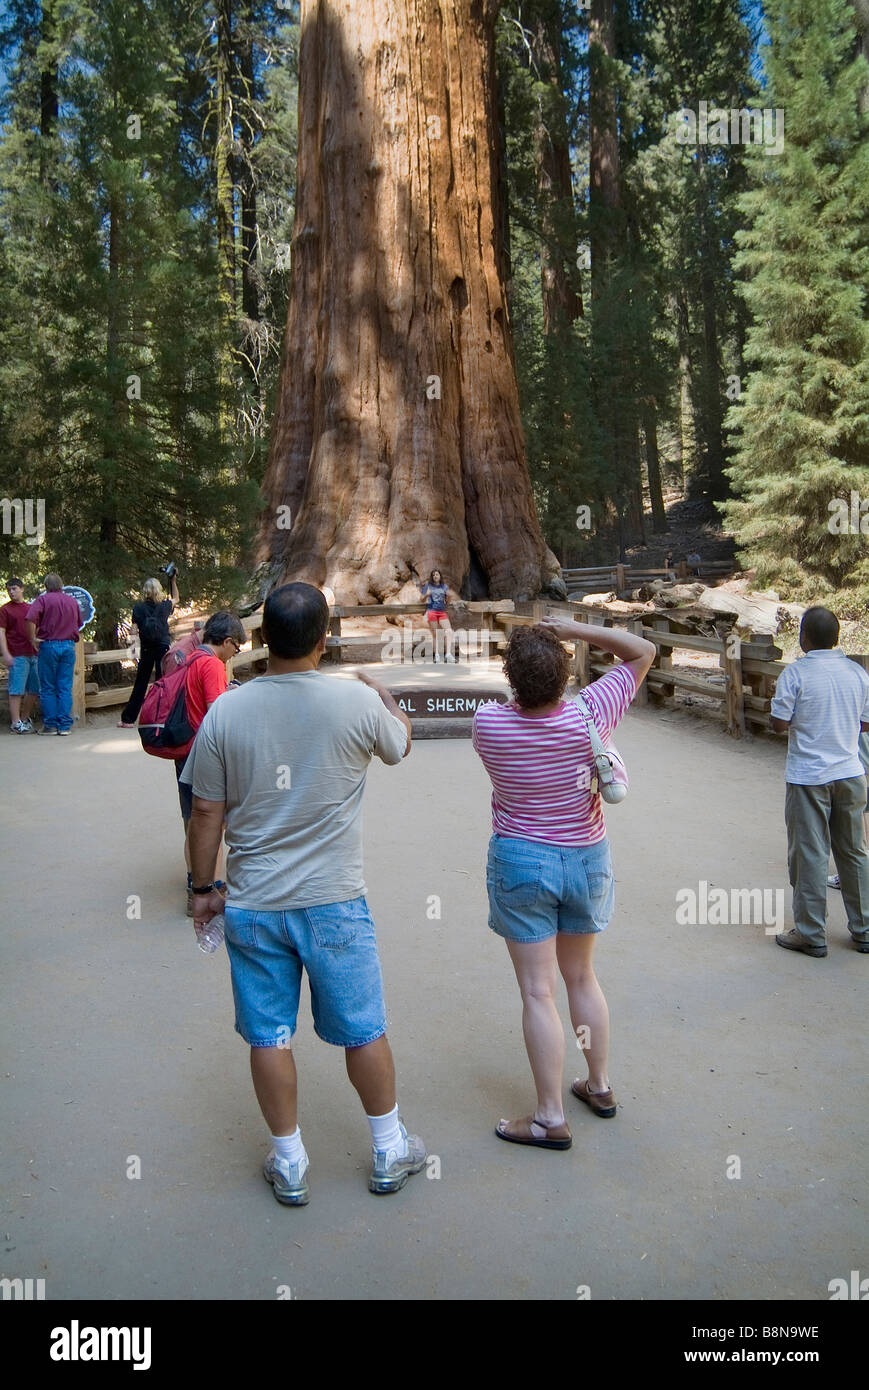 Tourists And General Sherman Redwood Tree In Sequoia National Park, California USA Stock Photo